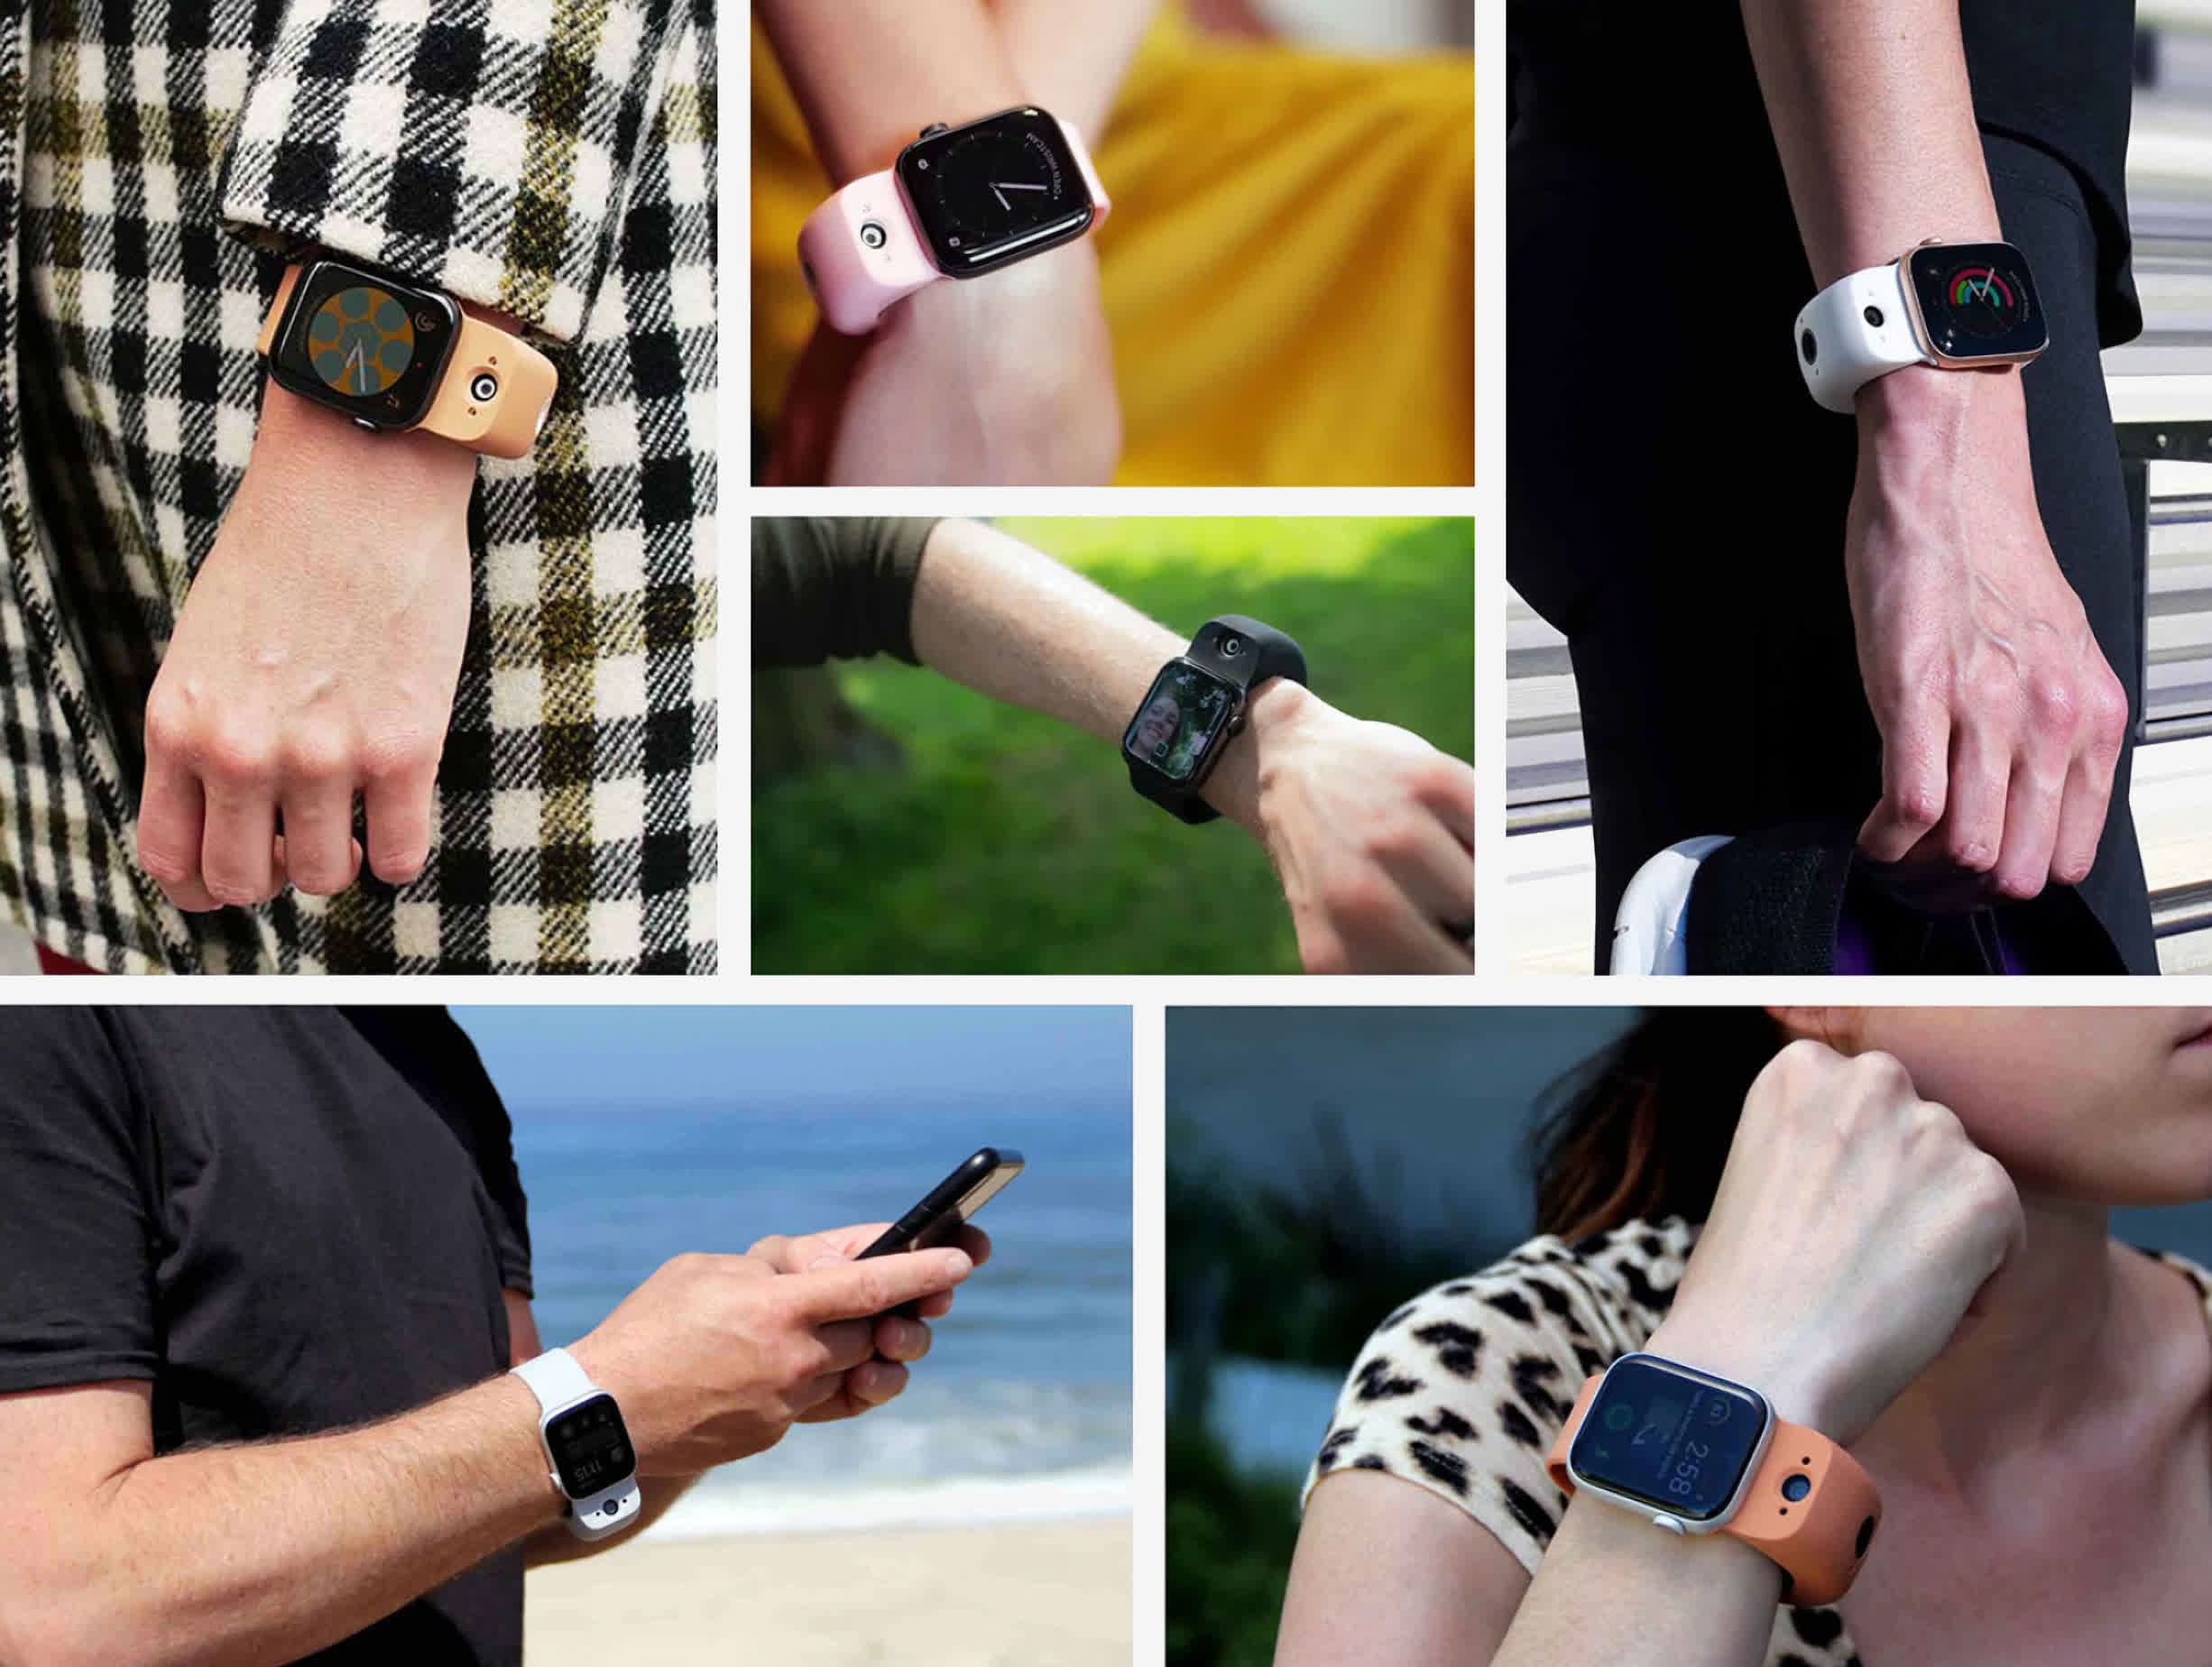 Wristcam adds two cameras to your Apple Watch